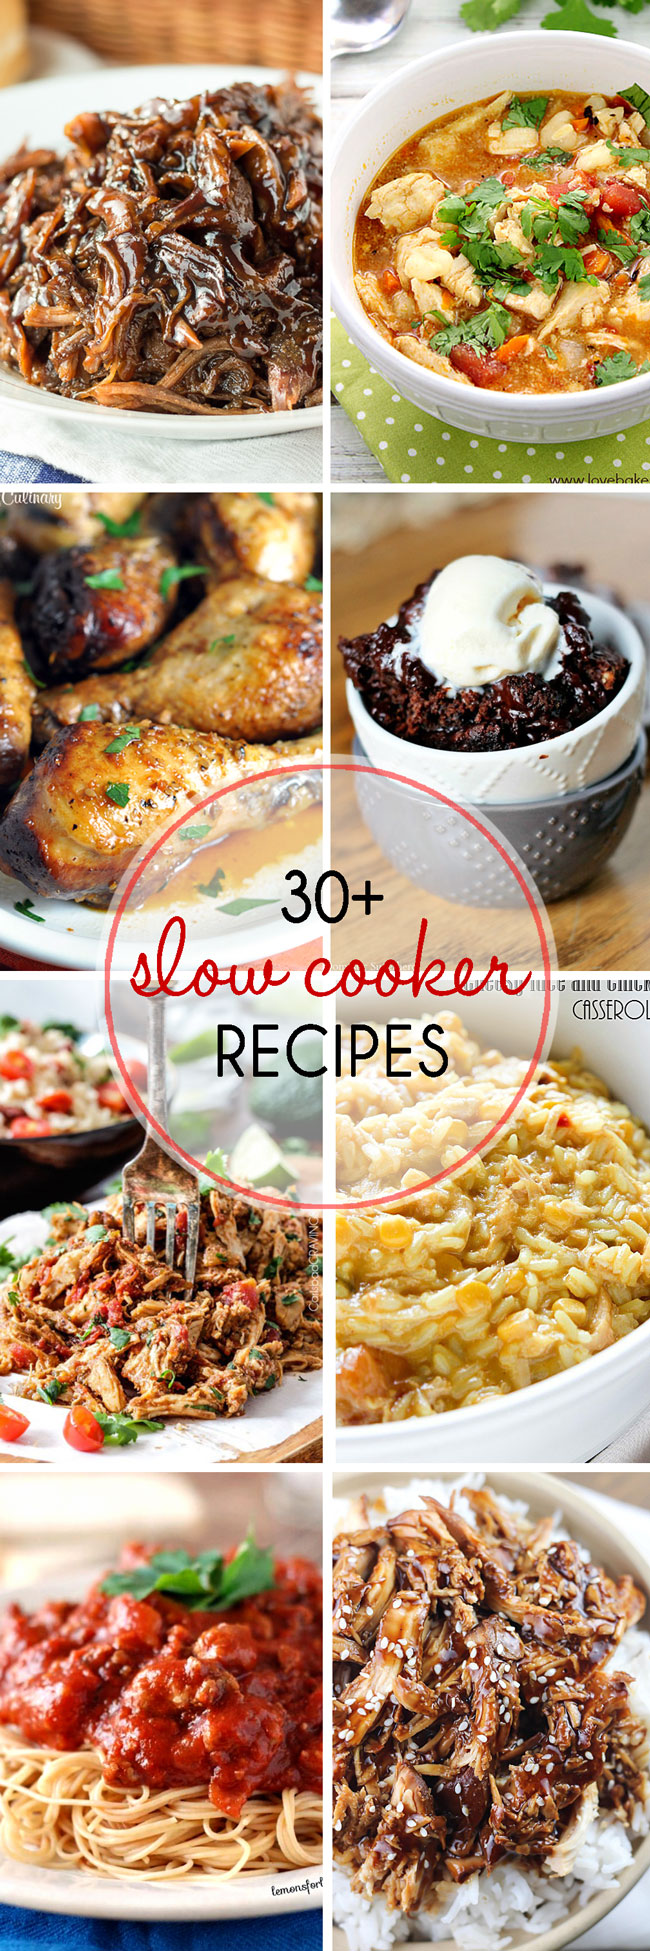 If you love crock pot dishes then you will fall in love with these 30 Slow Cooker Recipes. Dinner & dessert ideas made so much better with slow cooking. I have to say- if you have never made dessert in a slow cooker, you will swoon over these amazing recipes being shared here. Pulled pork, chicken or beef, side dishes, soups, chowders & more- all creamy or saucy or just flat out delectable. You don't want to miss this with more than 30 to choose from!